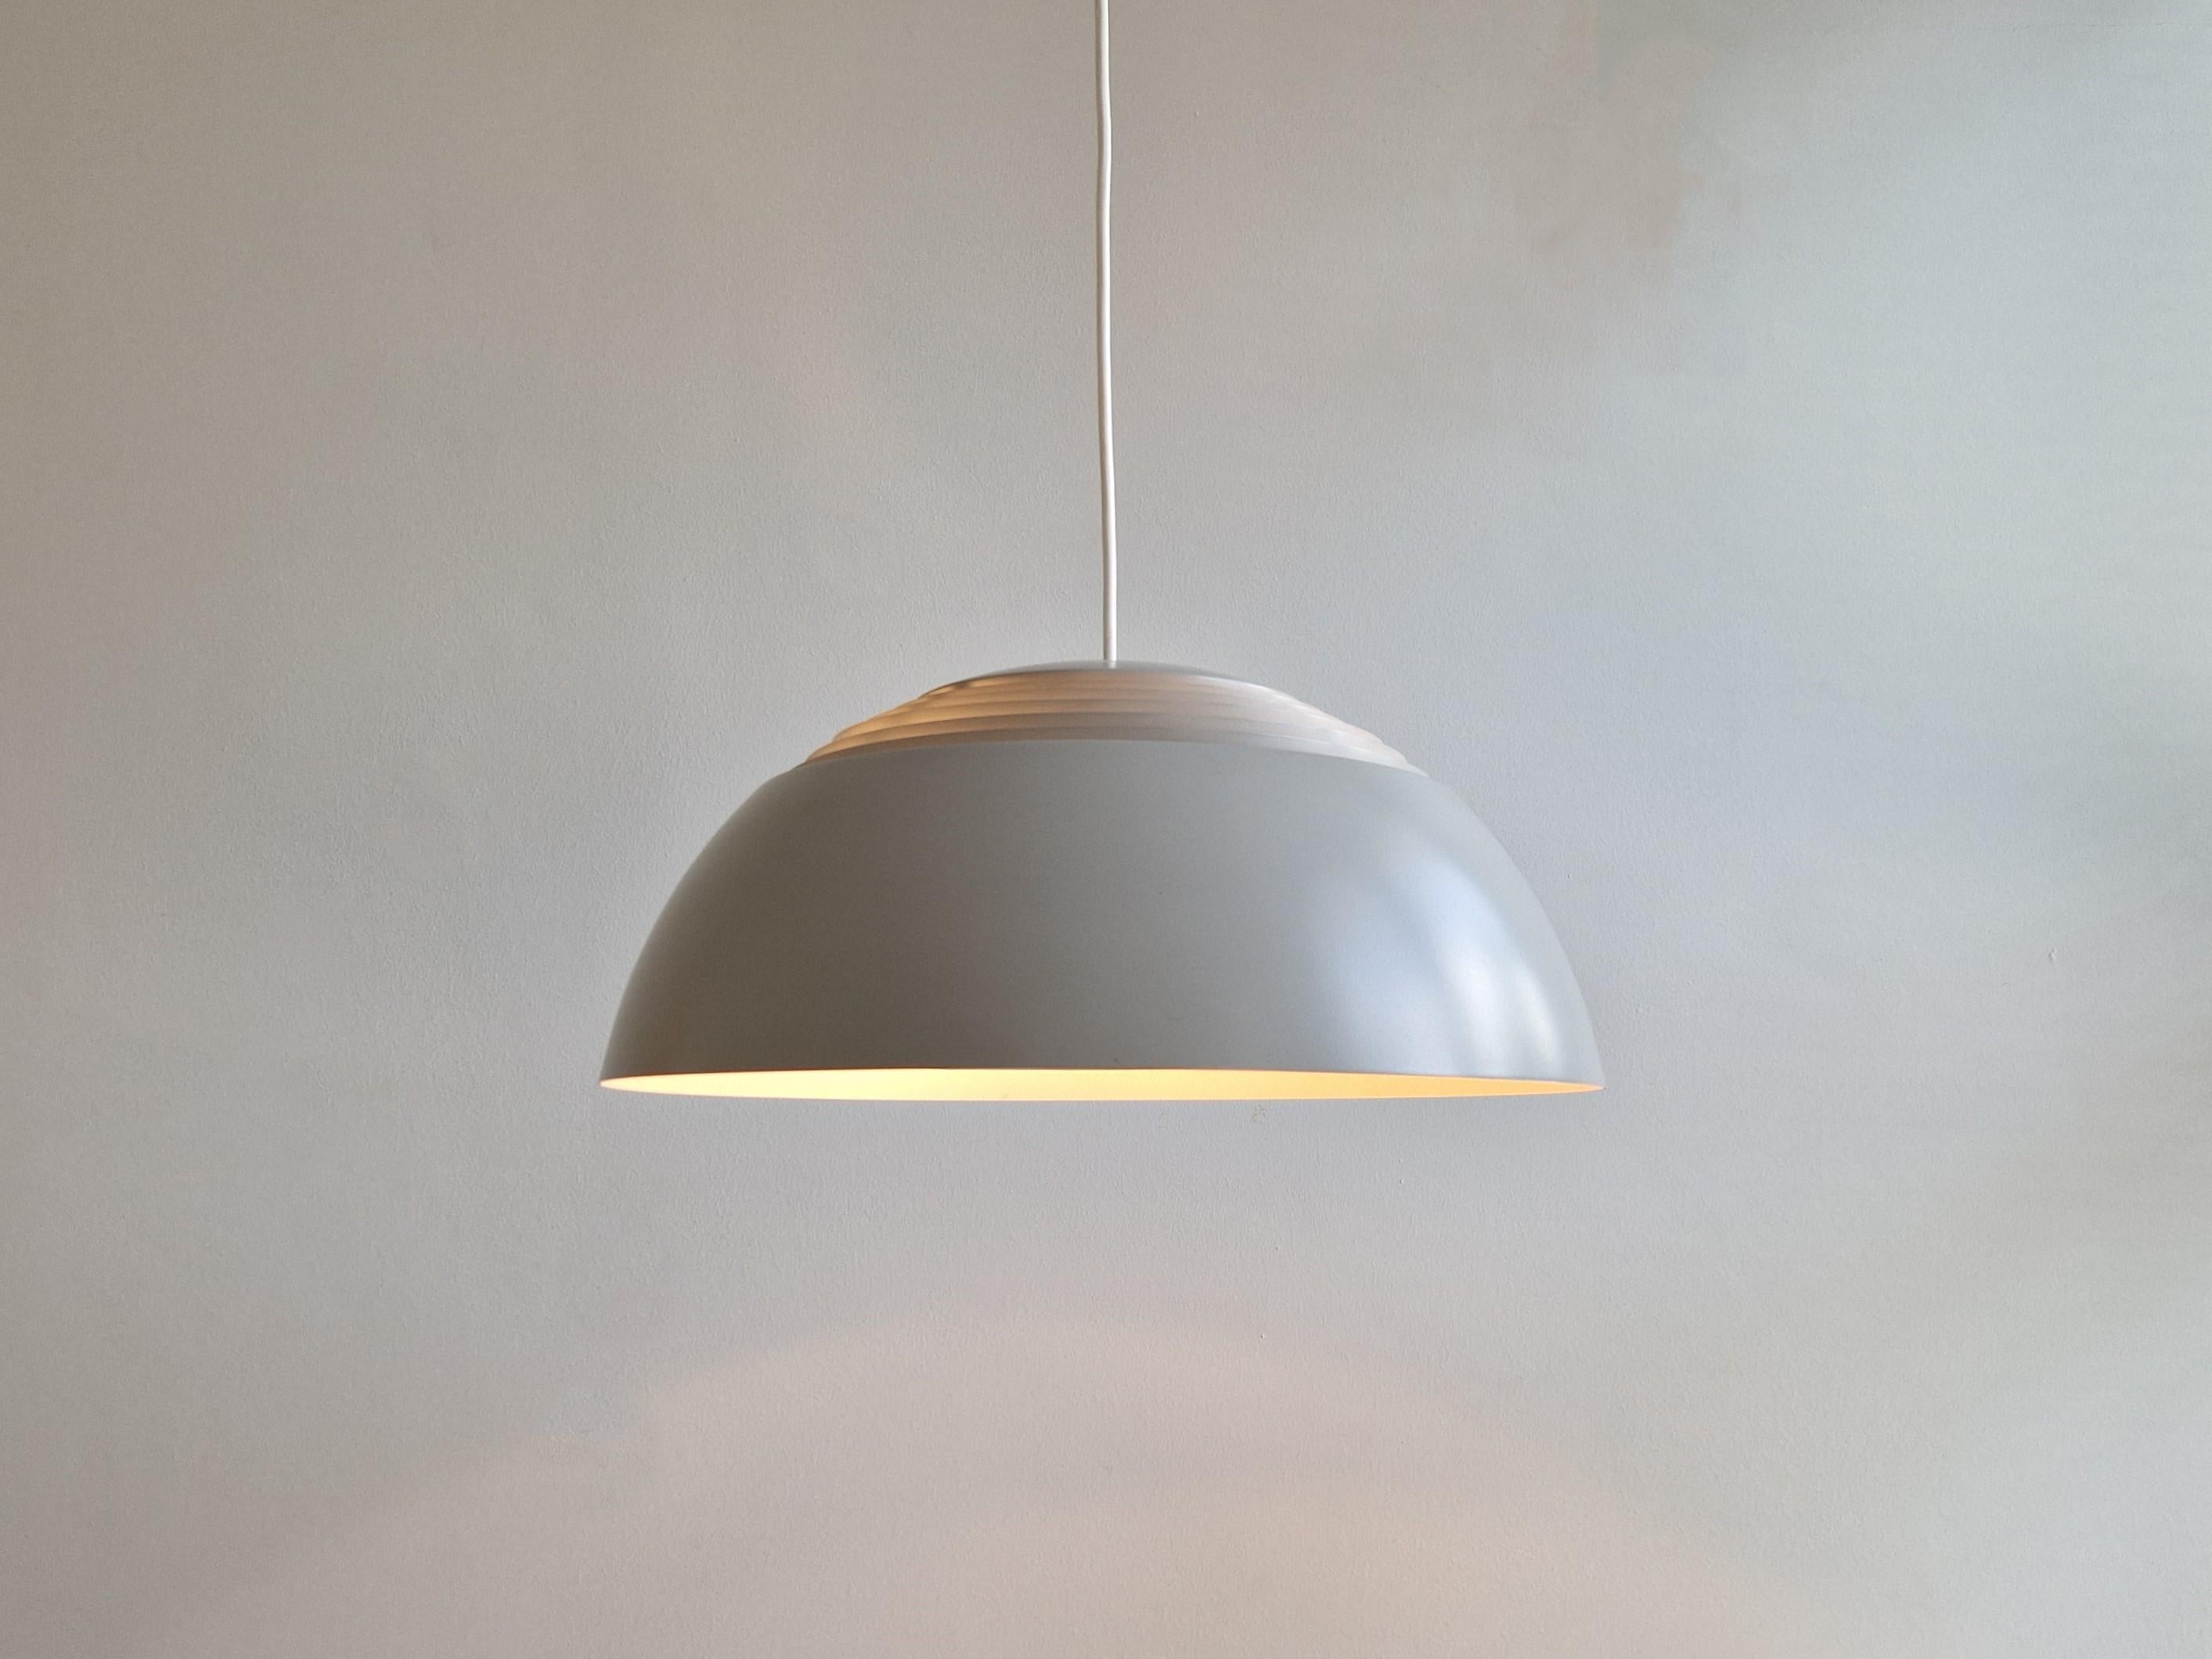 Light grey 'AJ Royal' pendant lamp by Arne Jacobsen for Louis Poulsen In Good Condition For Sale In Steenwijk, NL